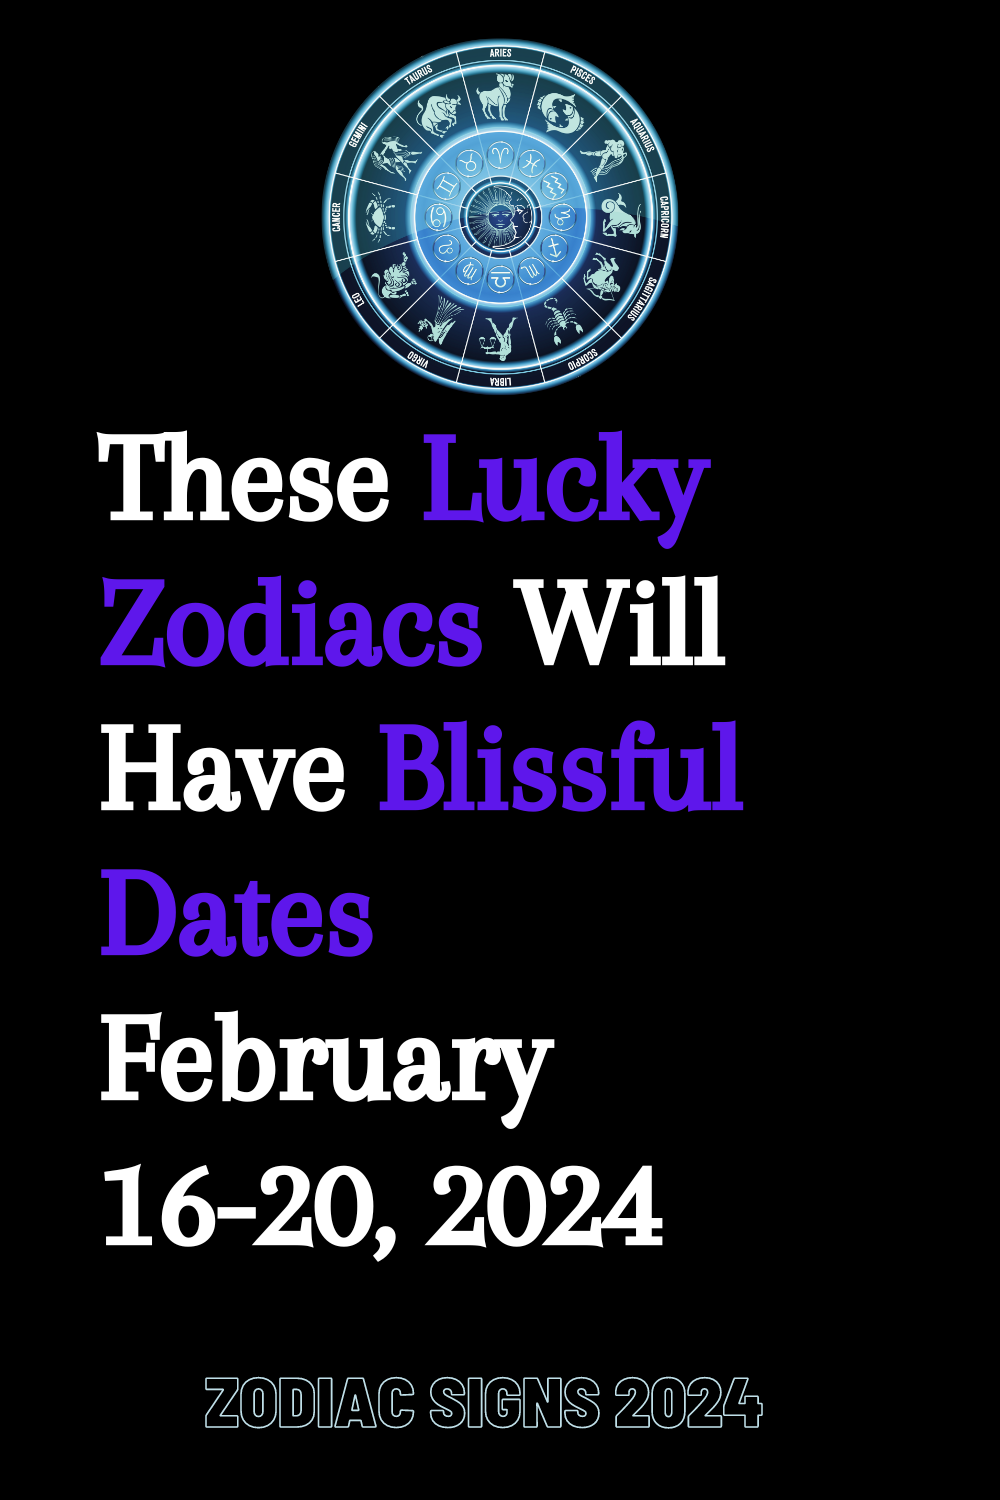 These Lucky Zodiacs Will Have Blissful Dates February 1620, 2024